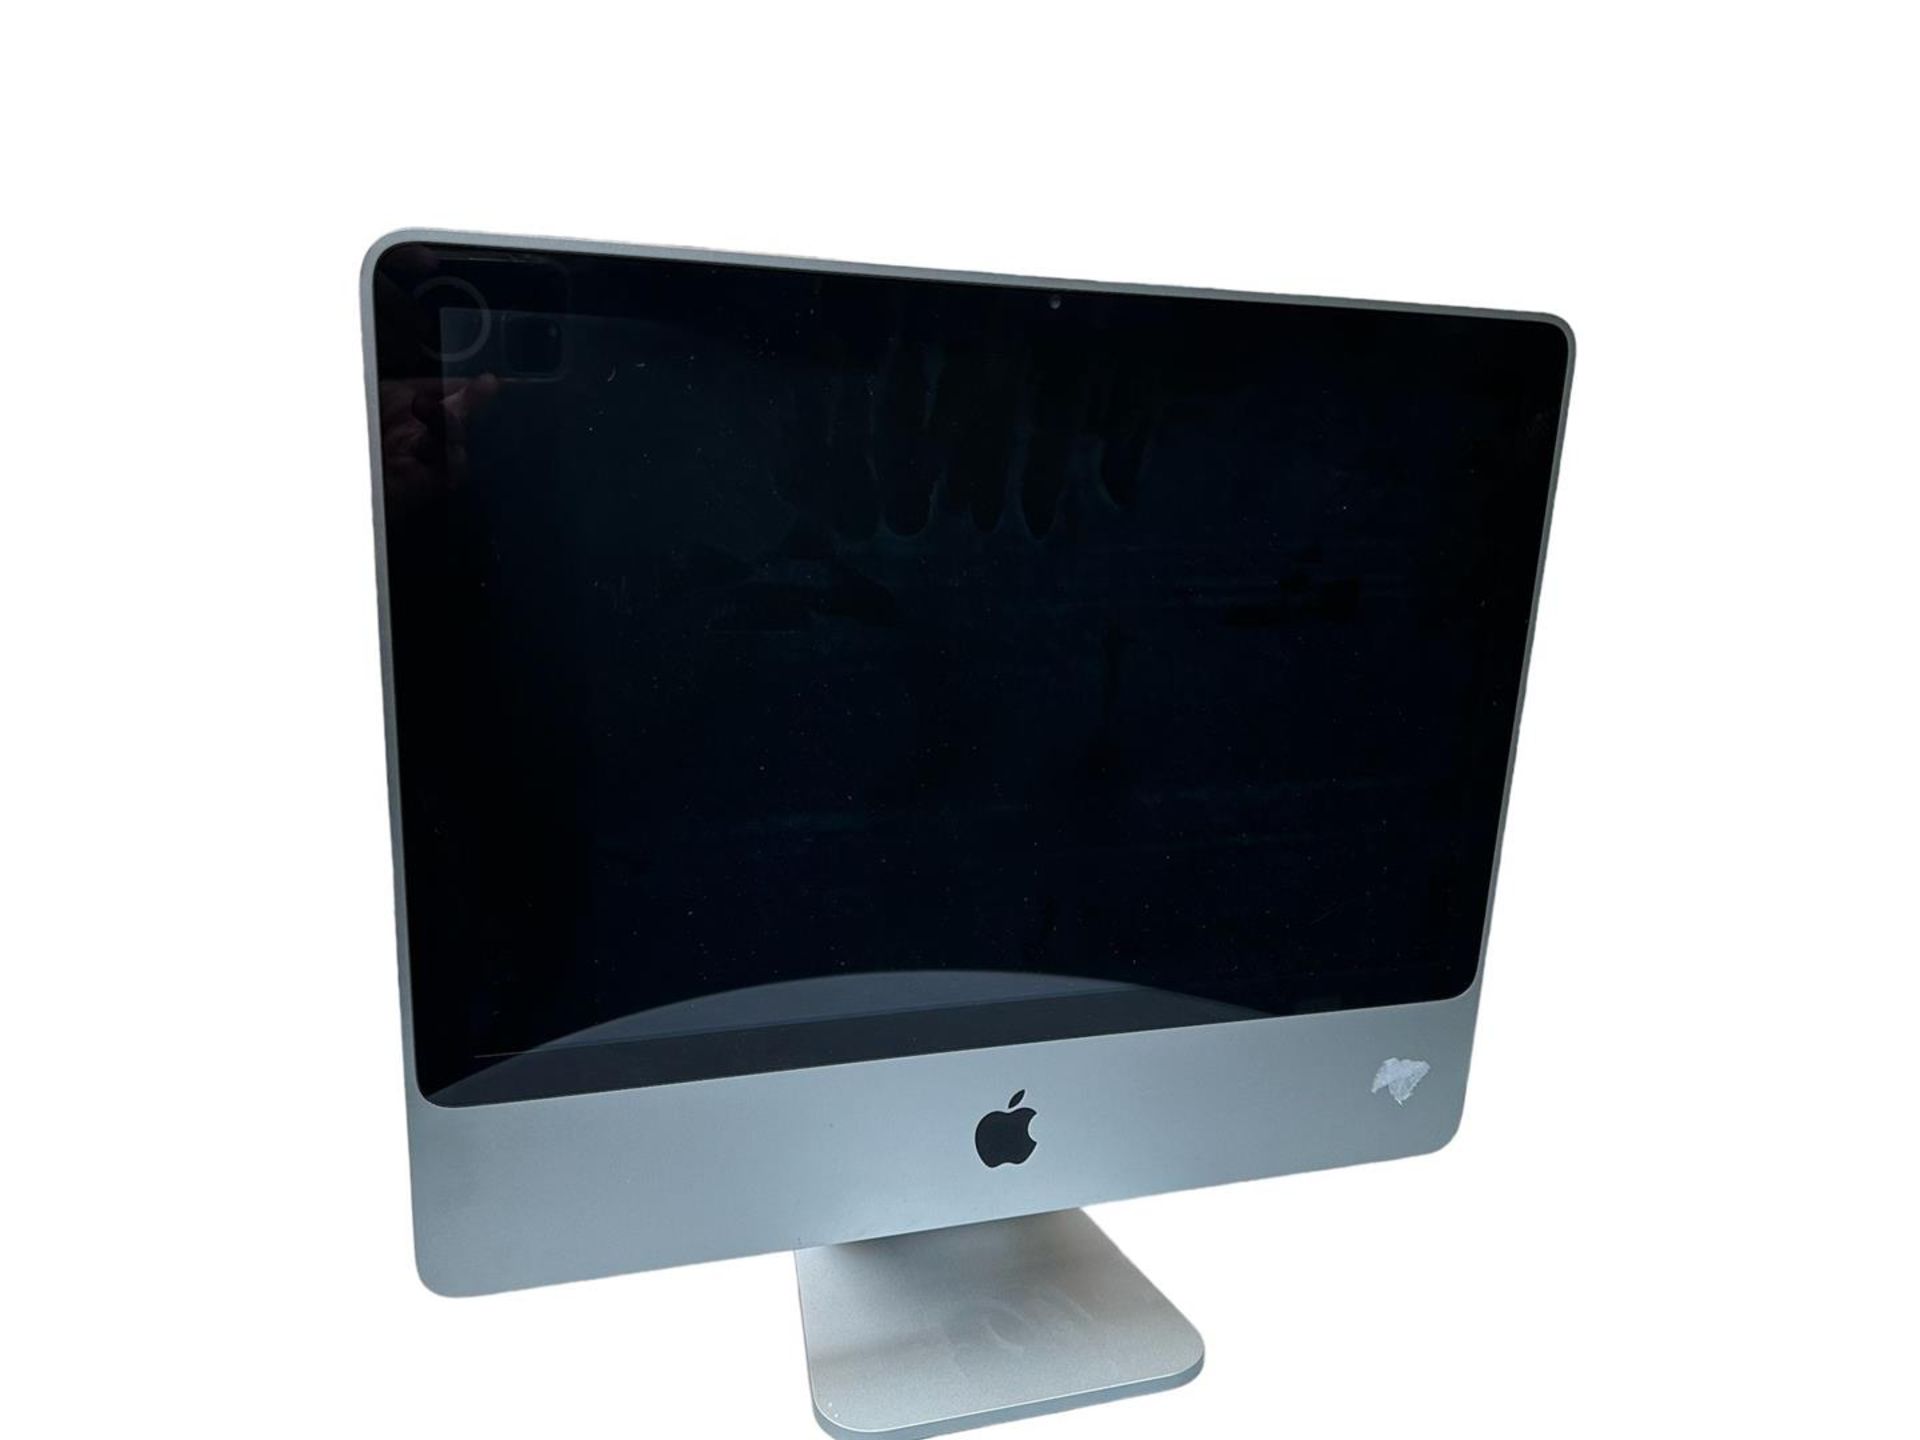 Apple Mac Type A1312 EMC 2429, 27-inch. Not tested.